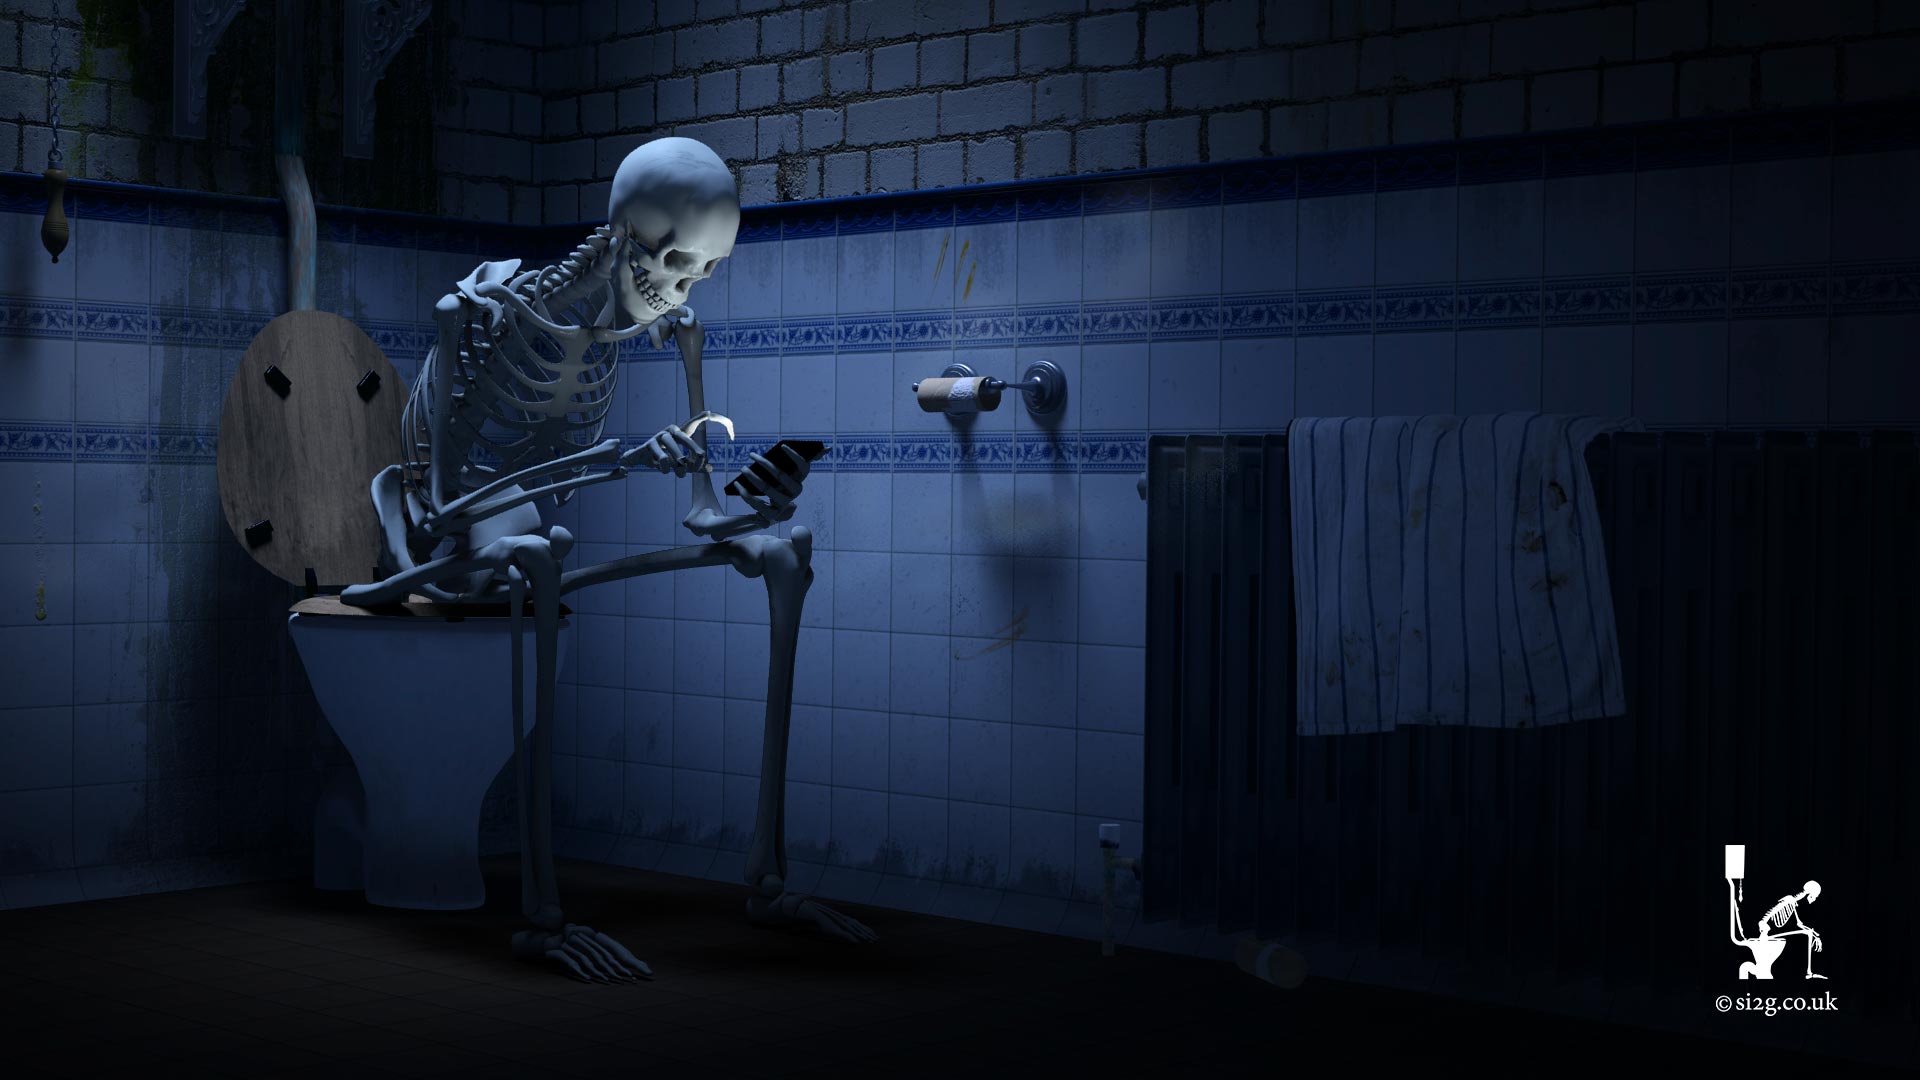 Skeleton on the Toilet - A frame from the Official S.i.2.G. company branding animation.  This concept was first developed in 1998 and was my company branding animation on the beginning of all the skateboard videos I made.  I wanted an animation that would become synonymous with my videos, like the search light branding animation 20th Century Fox have.  In 2004 I became self-employed in the TV post-production industry and launched S.i.2.G. using the same branding.  I continue to use the branding to this day and, every now and then, I update the animation using newer computer systems, software and techniques.